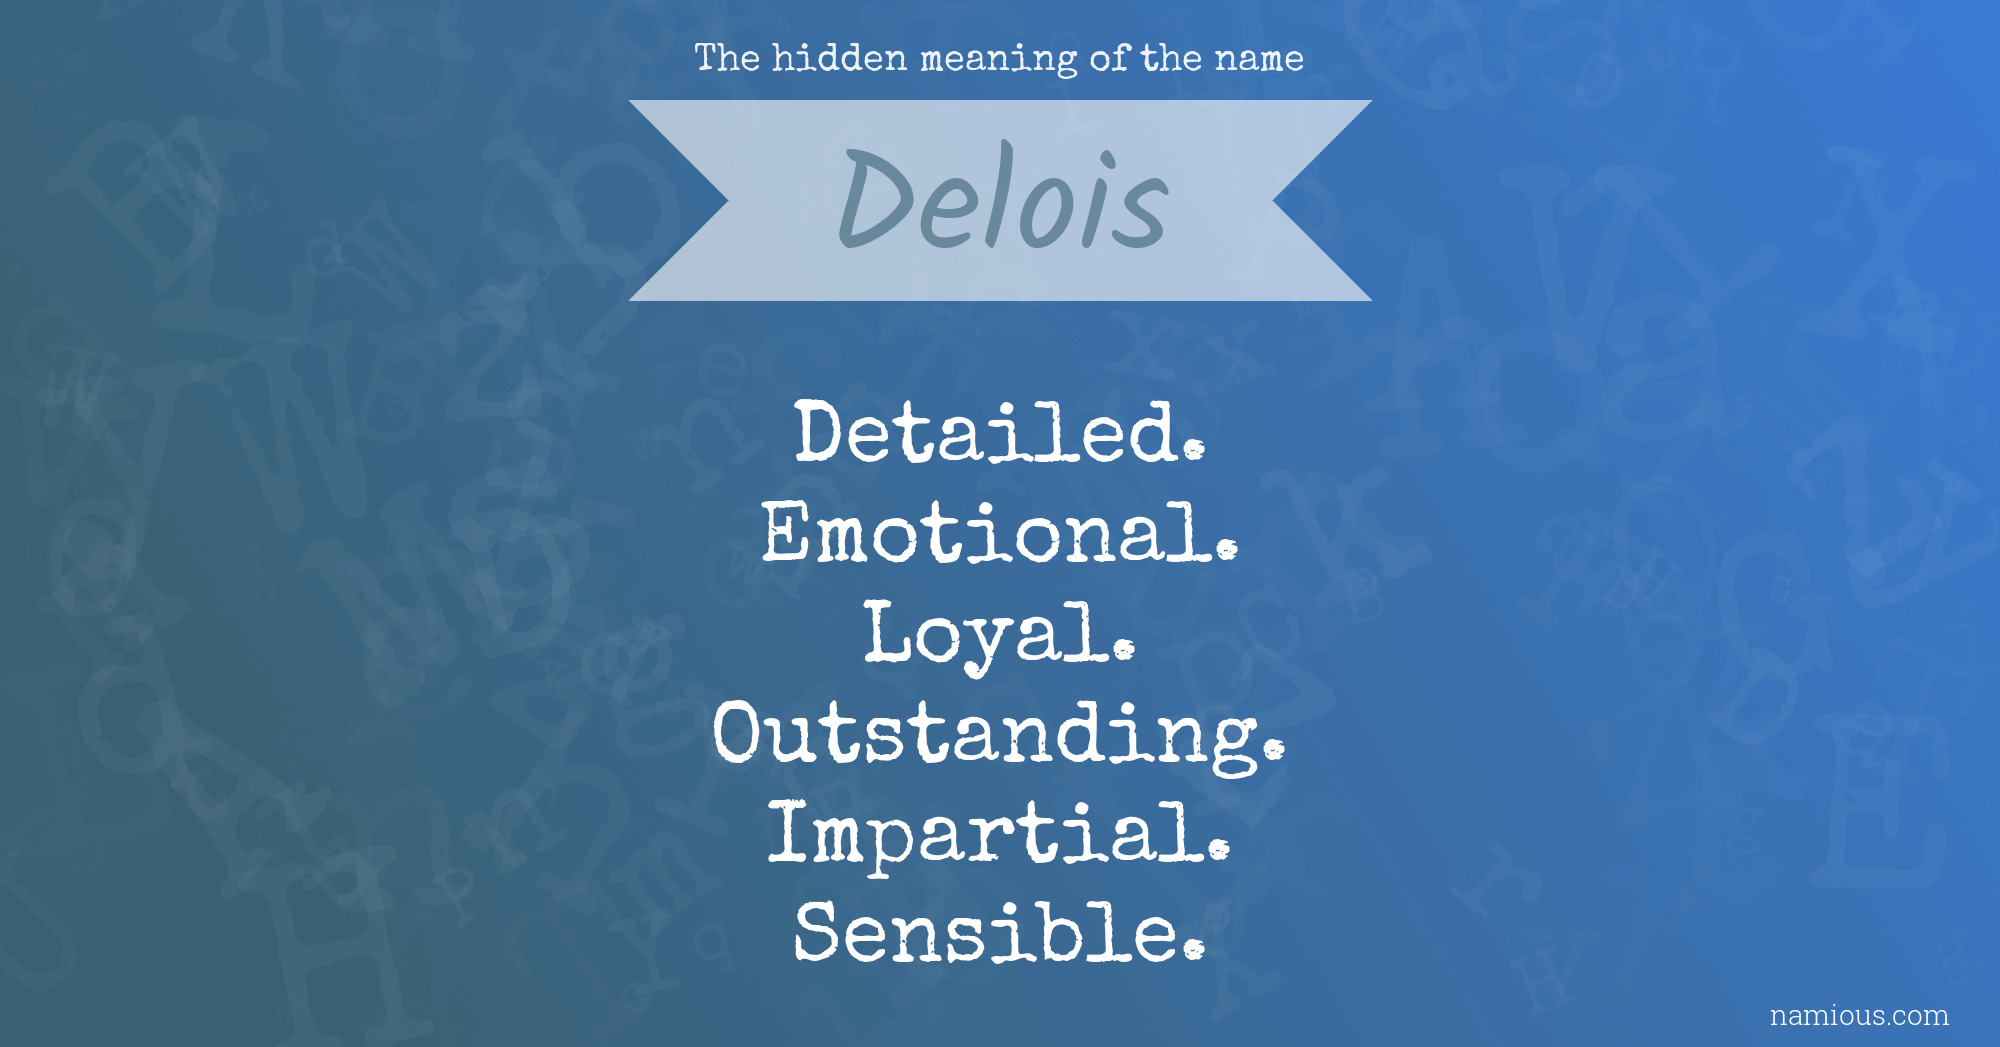 The hidden meaning of the name Delois